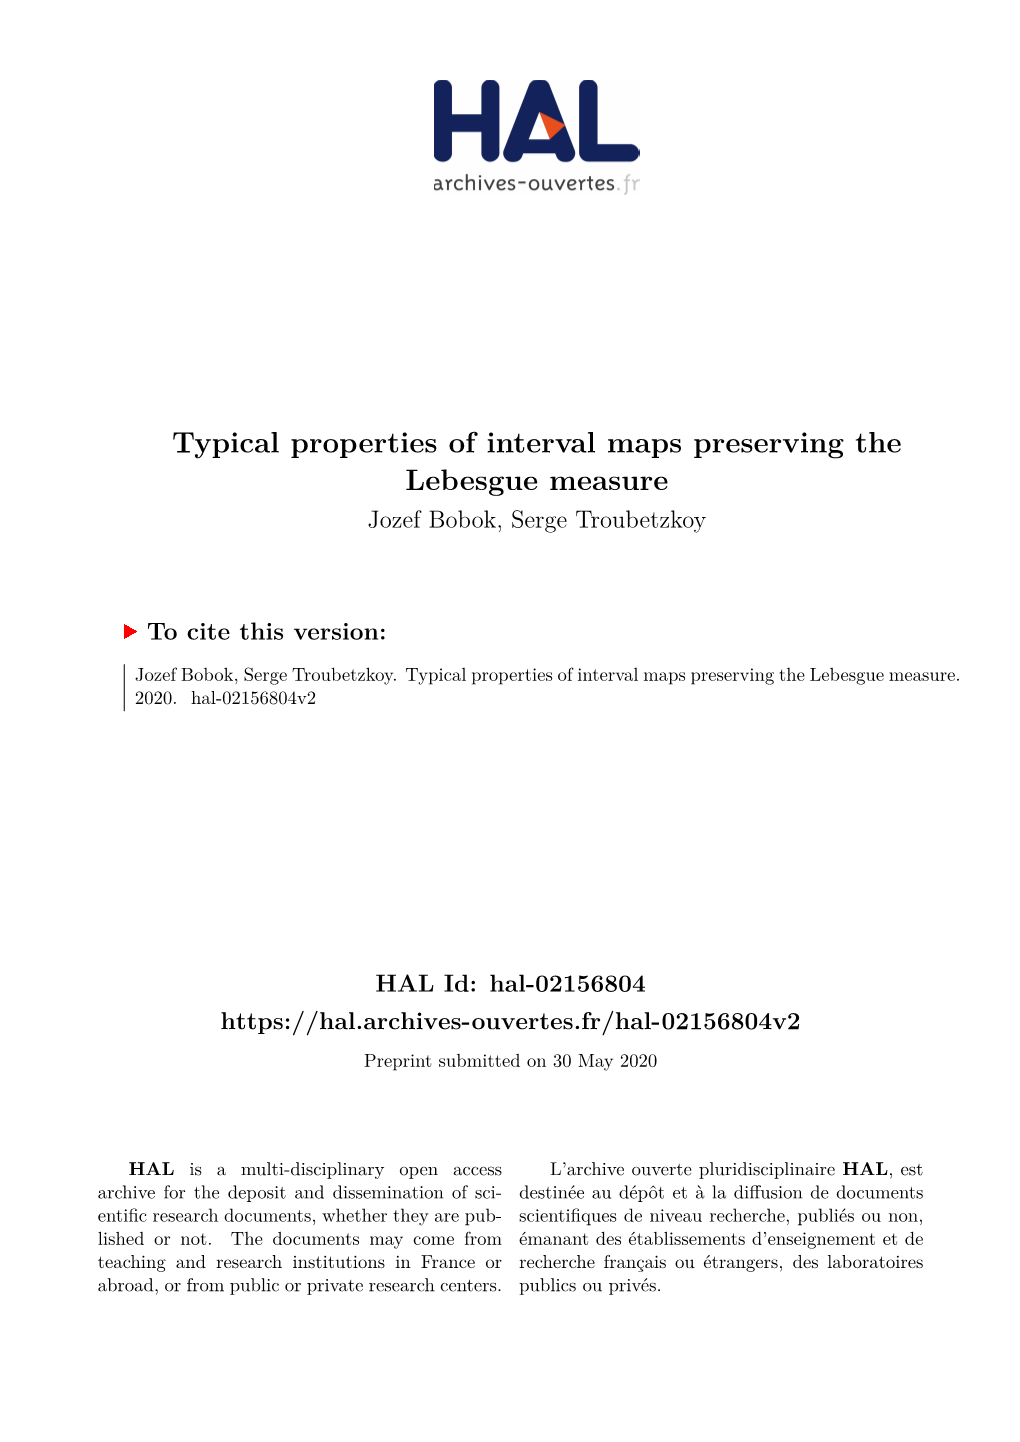 Typical Properties of Interval Maps Preserving the Lebesgue Measure Jozef Bobok, Serge Troubetzkoy